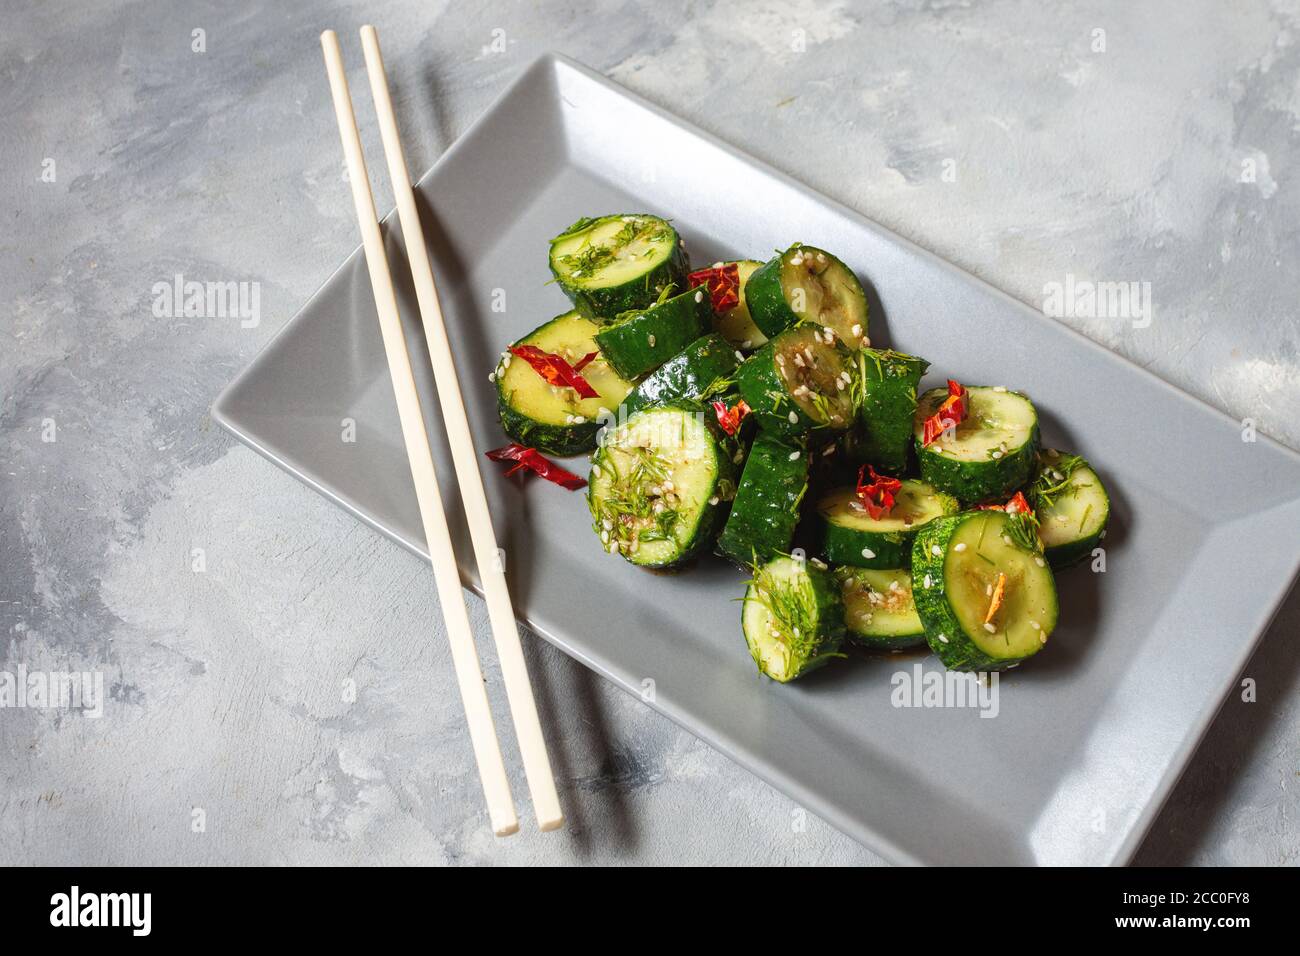 Asian beaten cucumber salad with chili and sesame seeds on a concrete background. Chinese food concept. Stock Photo